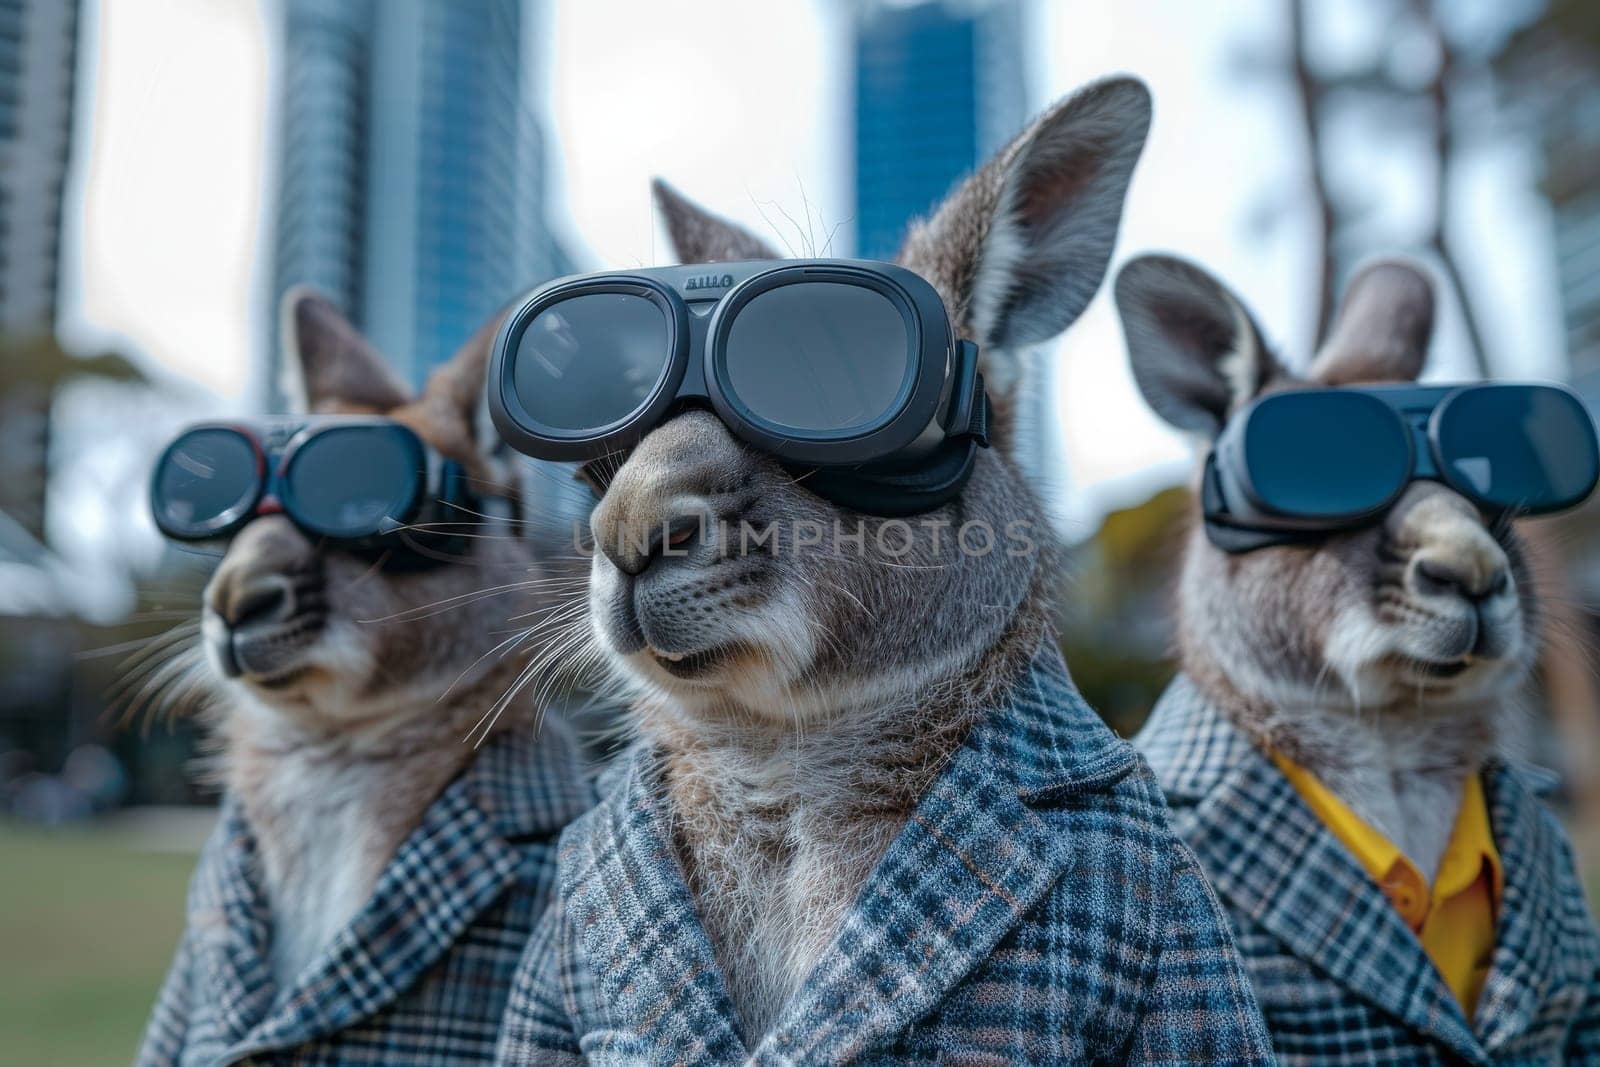 A kangaroo wearing virtual reality goggles. The image has a futuristic and playful mood. The kangaroo's eyes are closed, and it is looking at the camera